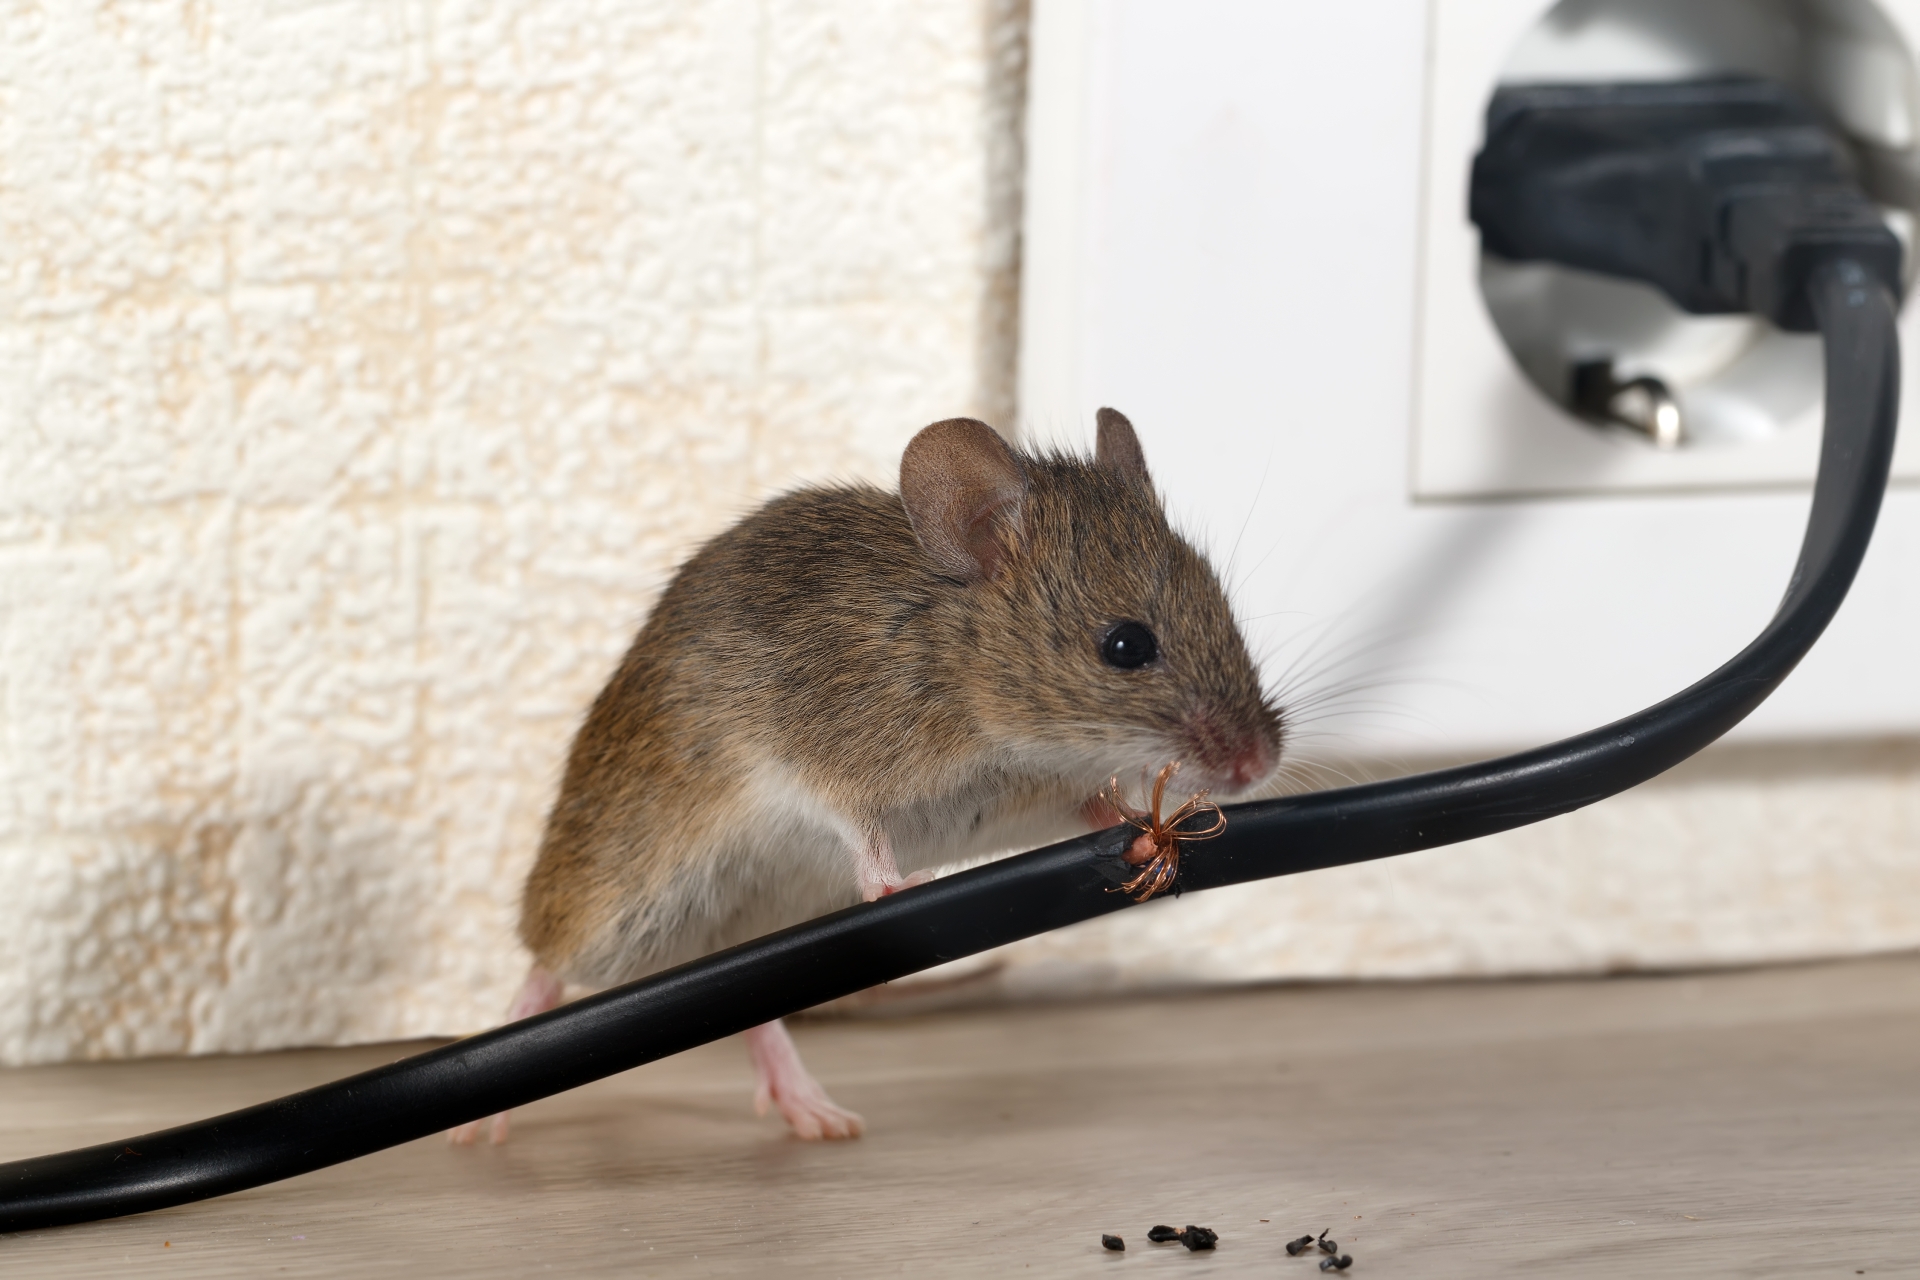 Mice Infestation, Pest Control in Fulham, SW6. Call Now 020 8166 9746